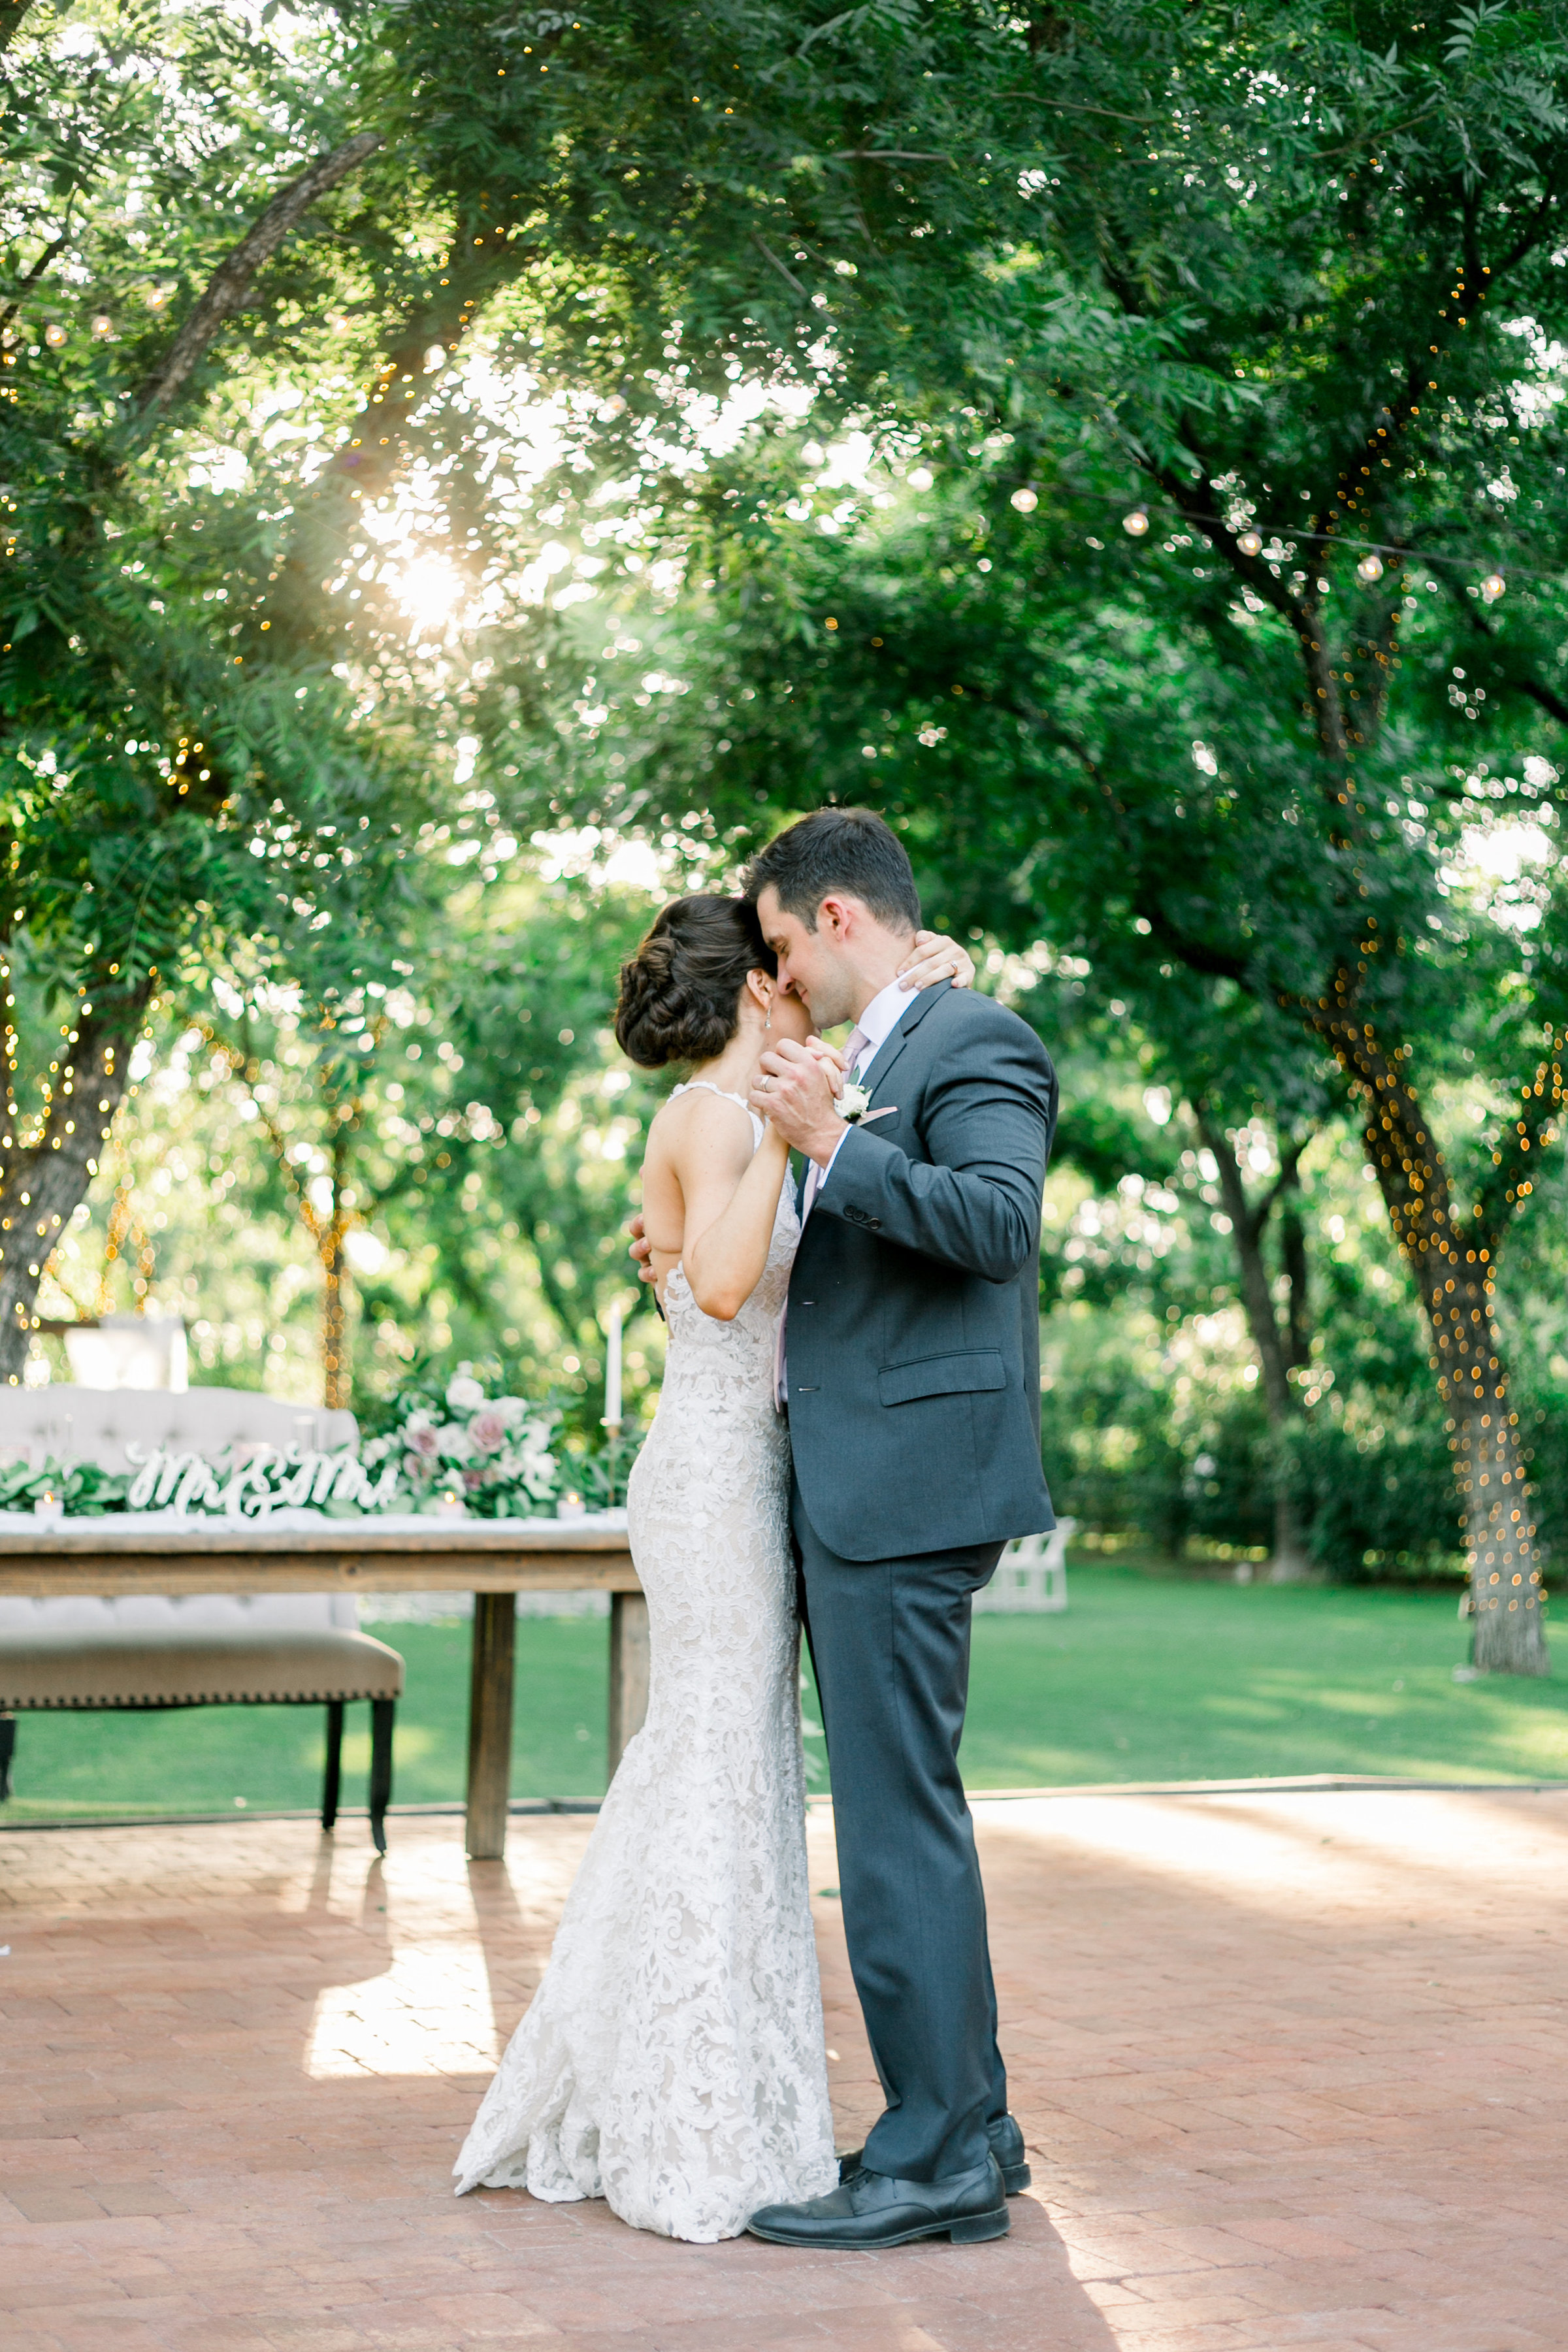 Karlie Colleen Photography - Venue At The Grove - Arizona Wedding - Maggie & Grant -102